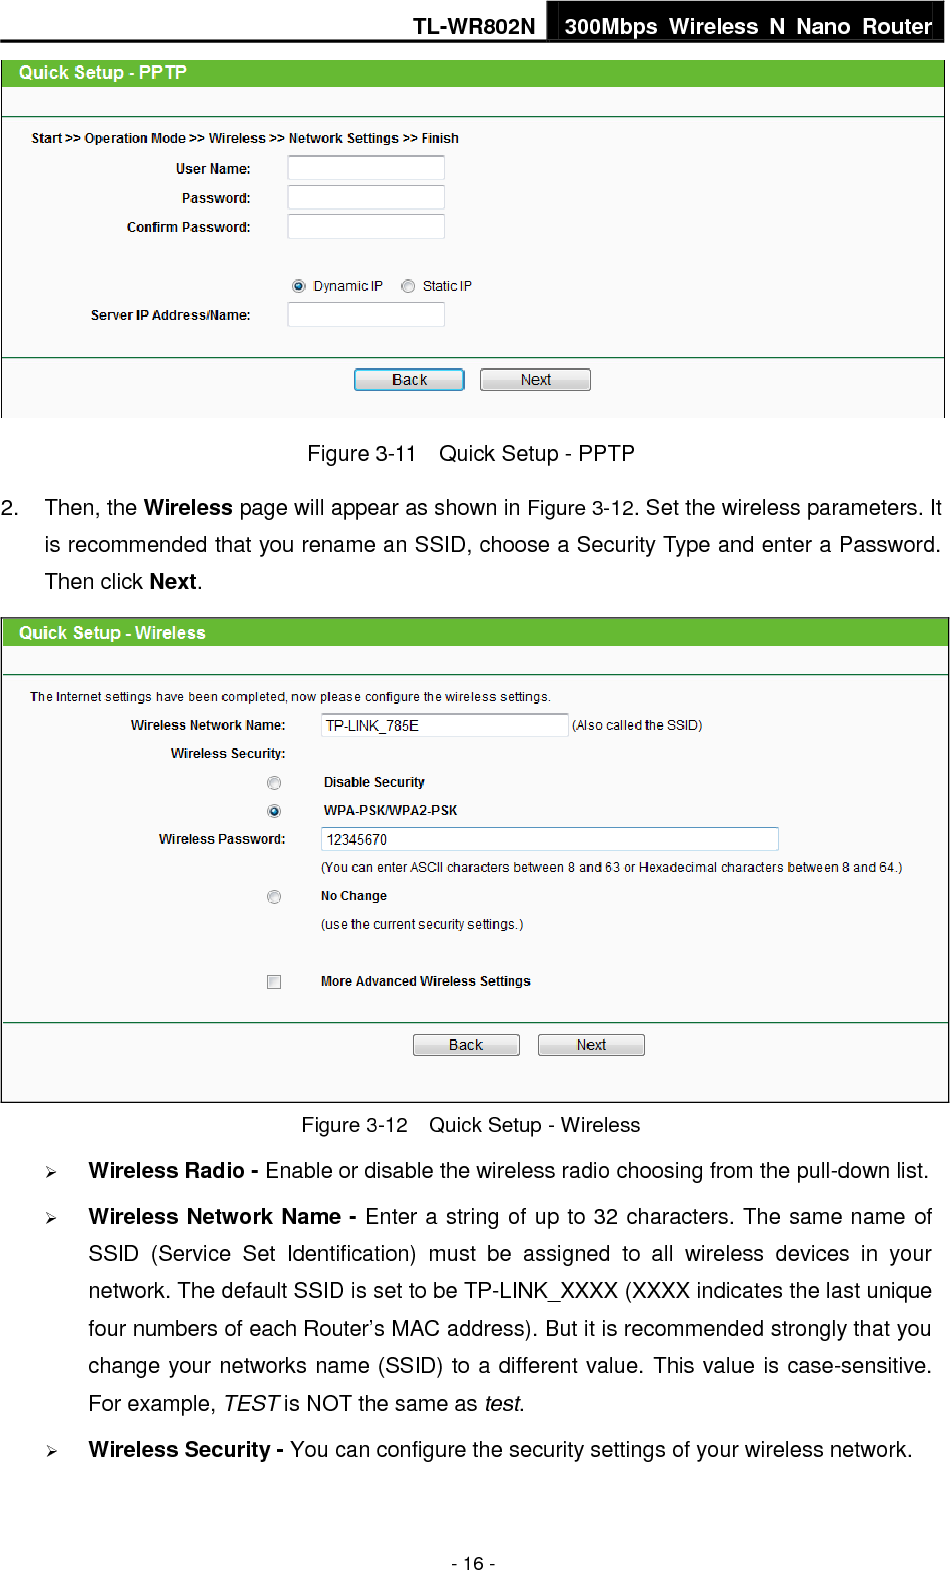 TL-WR802N 300Mbps  Wireless  N  Nano  Router  - 16 -  Figure 3-11    Quick Setup - PPTP 2.  Then, the Wireless page will appear as shown in Figure 3-12. Set the wireless parameters. It is recommended that you rename an SSID, choose a Security Type and enter a Password. Then click Next.  Figure 3-12  Quick Setup - Wireless  Wireless Radio - Enable or disable the wireless radio choosing from the pull-down list.    Wireless Network Name - Enter a string of up to 32 characters. The same name of SSID  (Service  Set  Identification)  must  be  assigned  to  all  wireless  devices  in  your network. The default SSID is set to be TP-LINK_XXXX (XXXX indicates the last unique four numbers of each Router’s MAC address). But it is recommended strongly that you change your networks name (SSID) to a different value. This value is case-sensitive. For example, TEST is NOT the same as test.  Wireless Security - You can configure the security settings of your wireless network. 